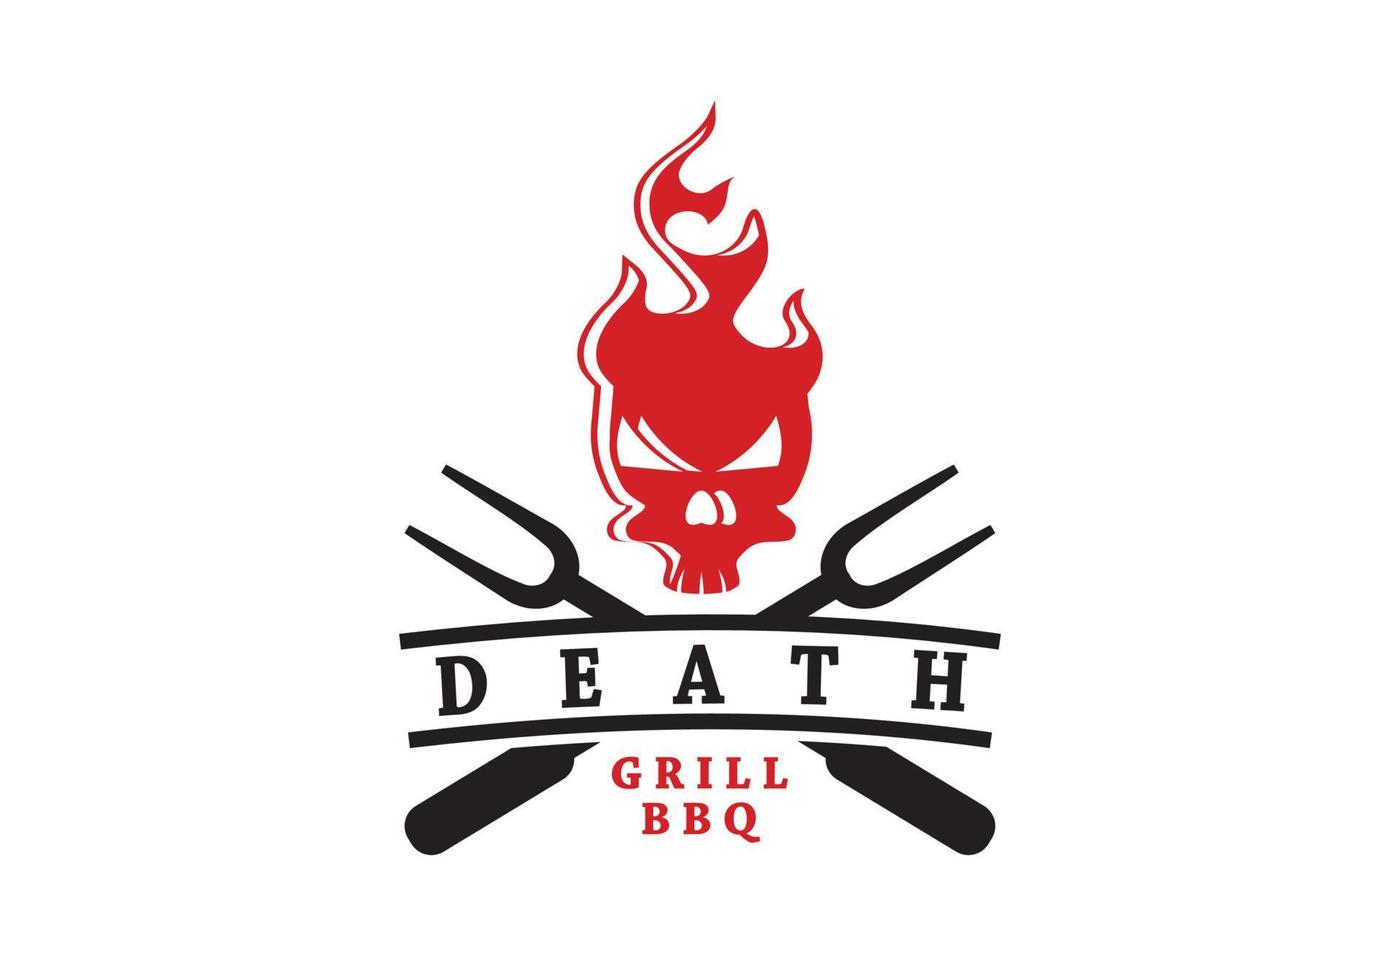 fire skull logo, suitable for barbecue food brands, cafes, restaurants, and others. vector